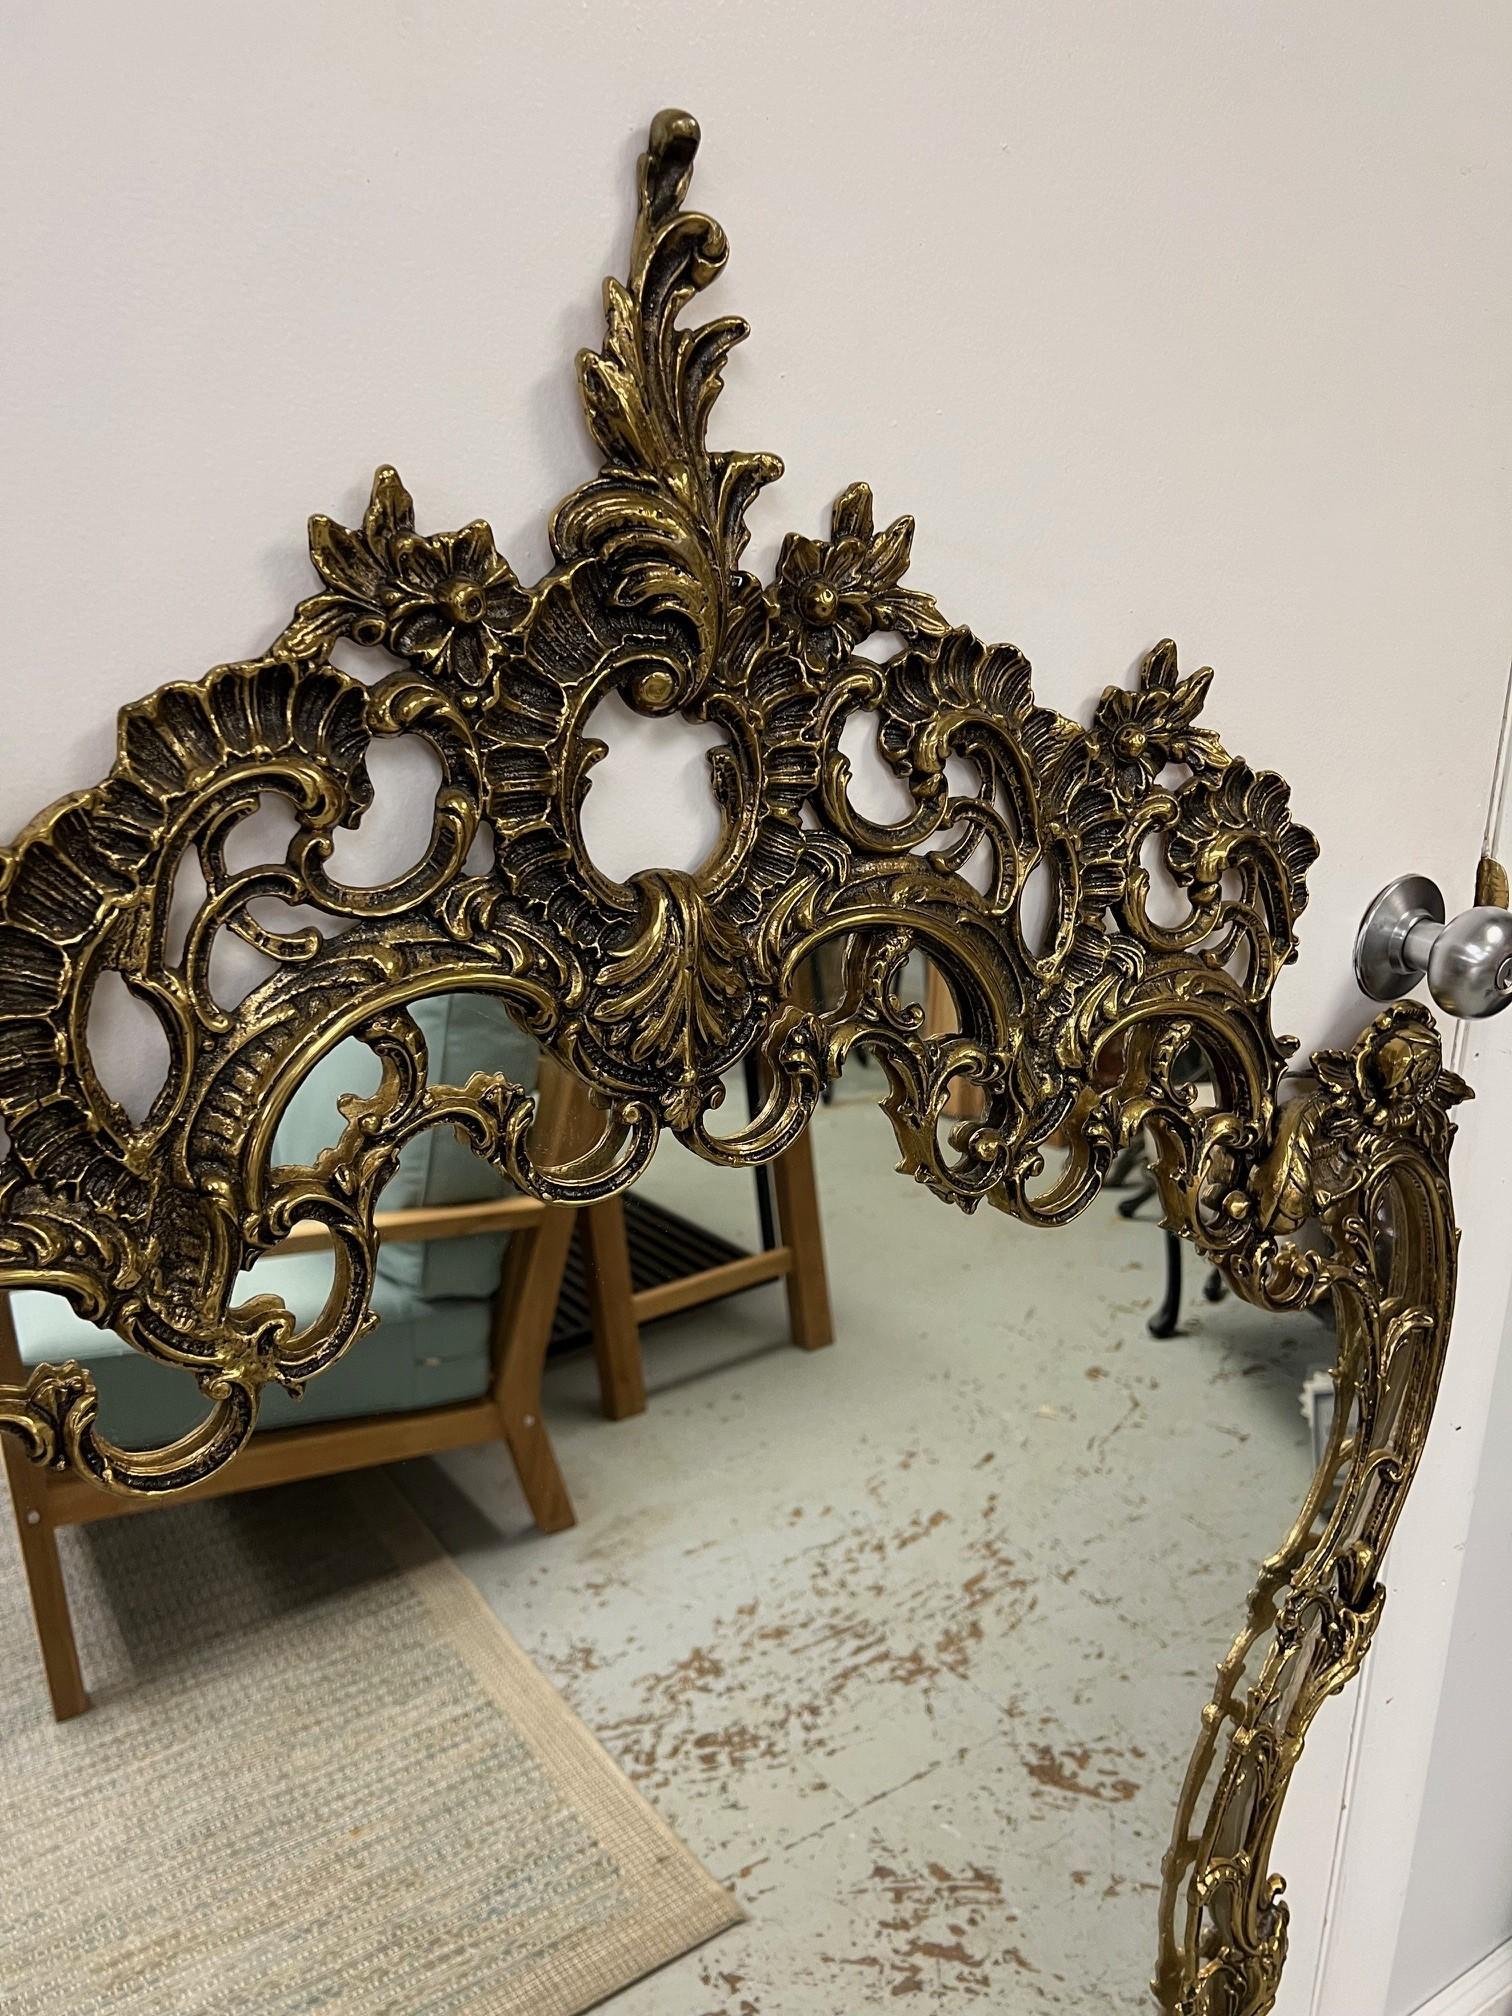 Solid brass pair of French Rococo style wall mirrors. Made in Europe possibly France late 40's early 50s in good condition. It's possible the mirrors and backs have been replaced years ago but the frames are original and in good condition.